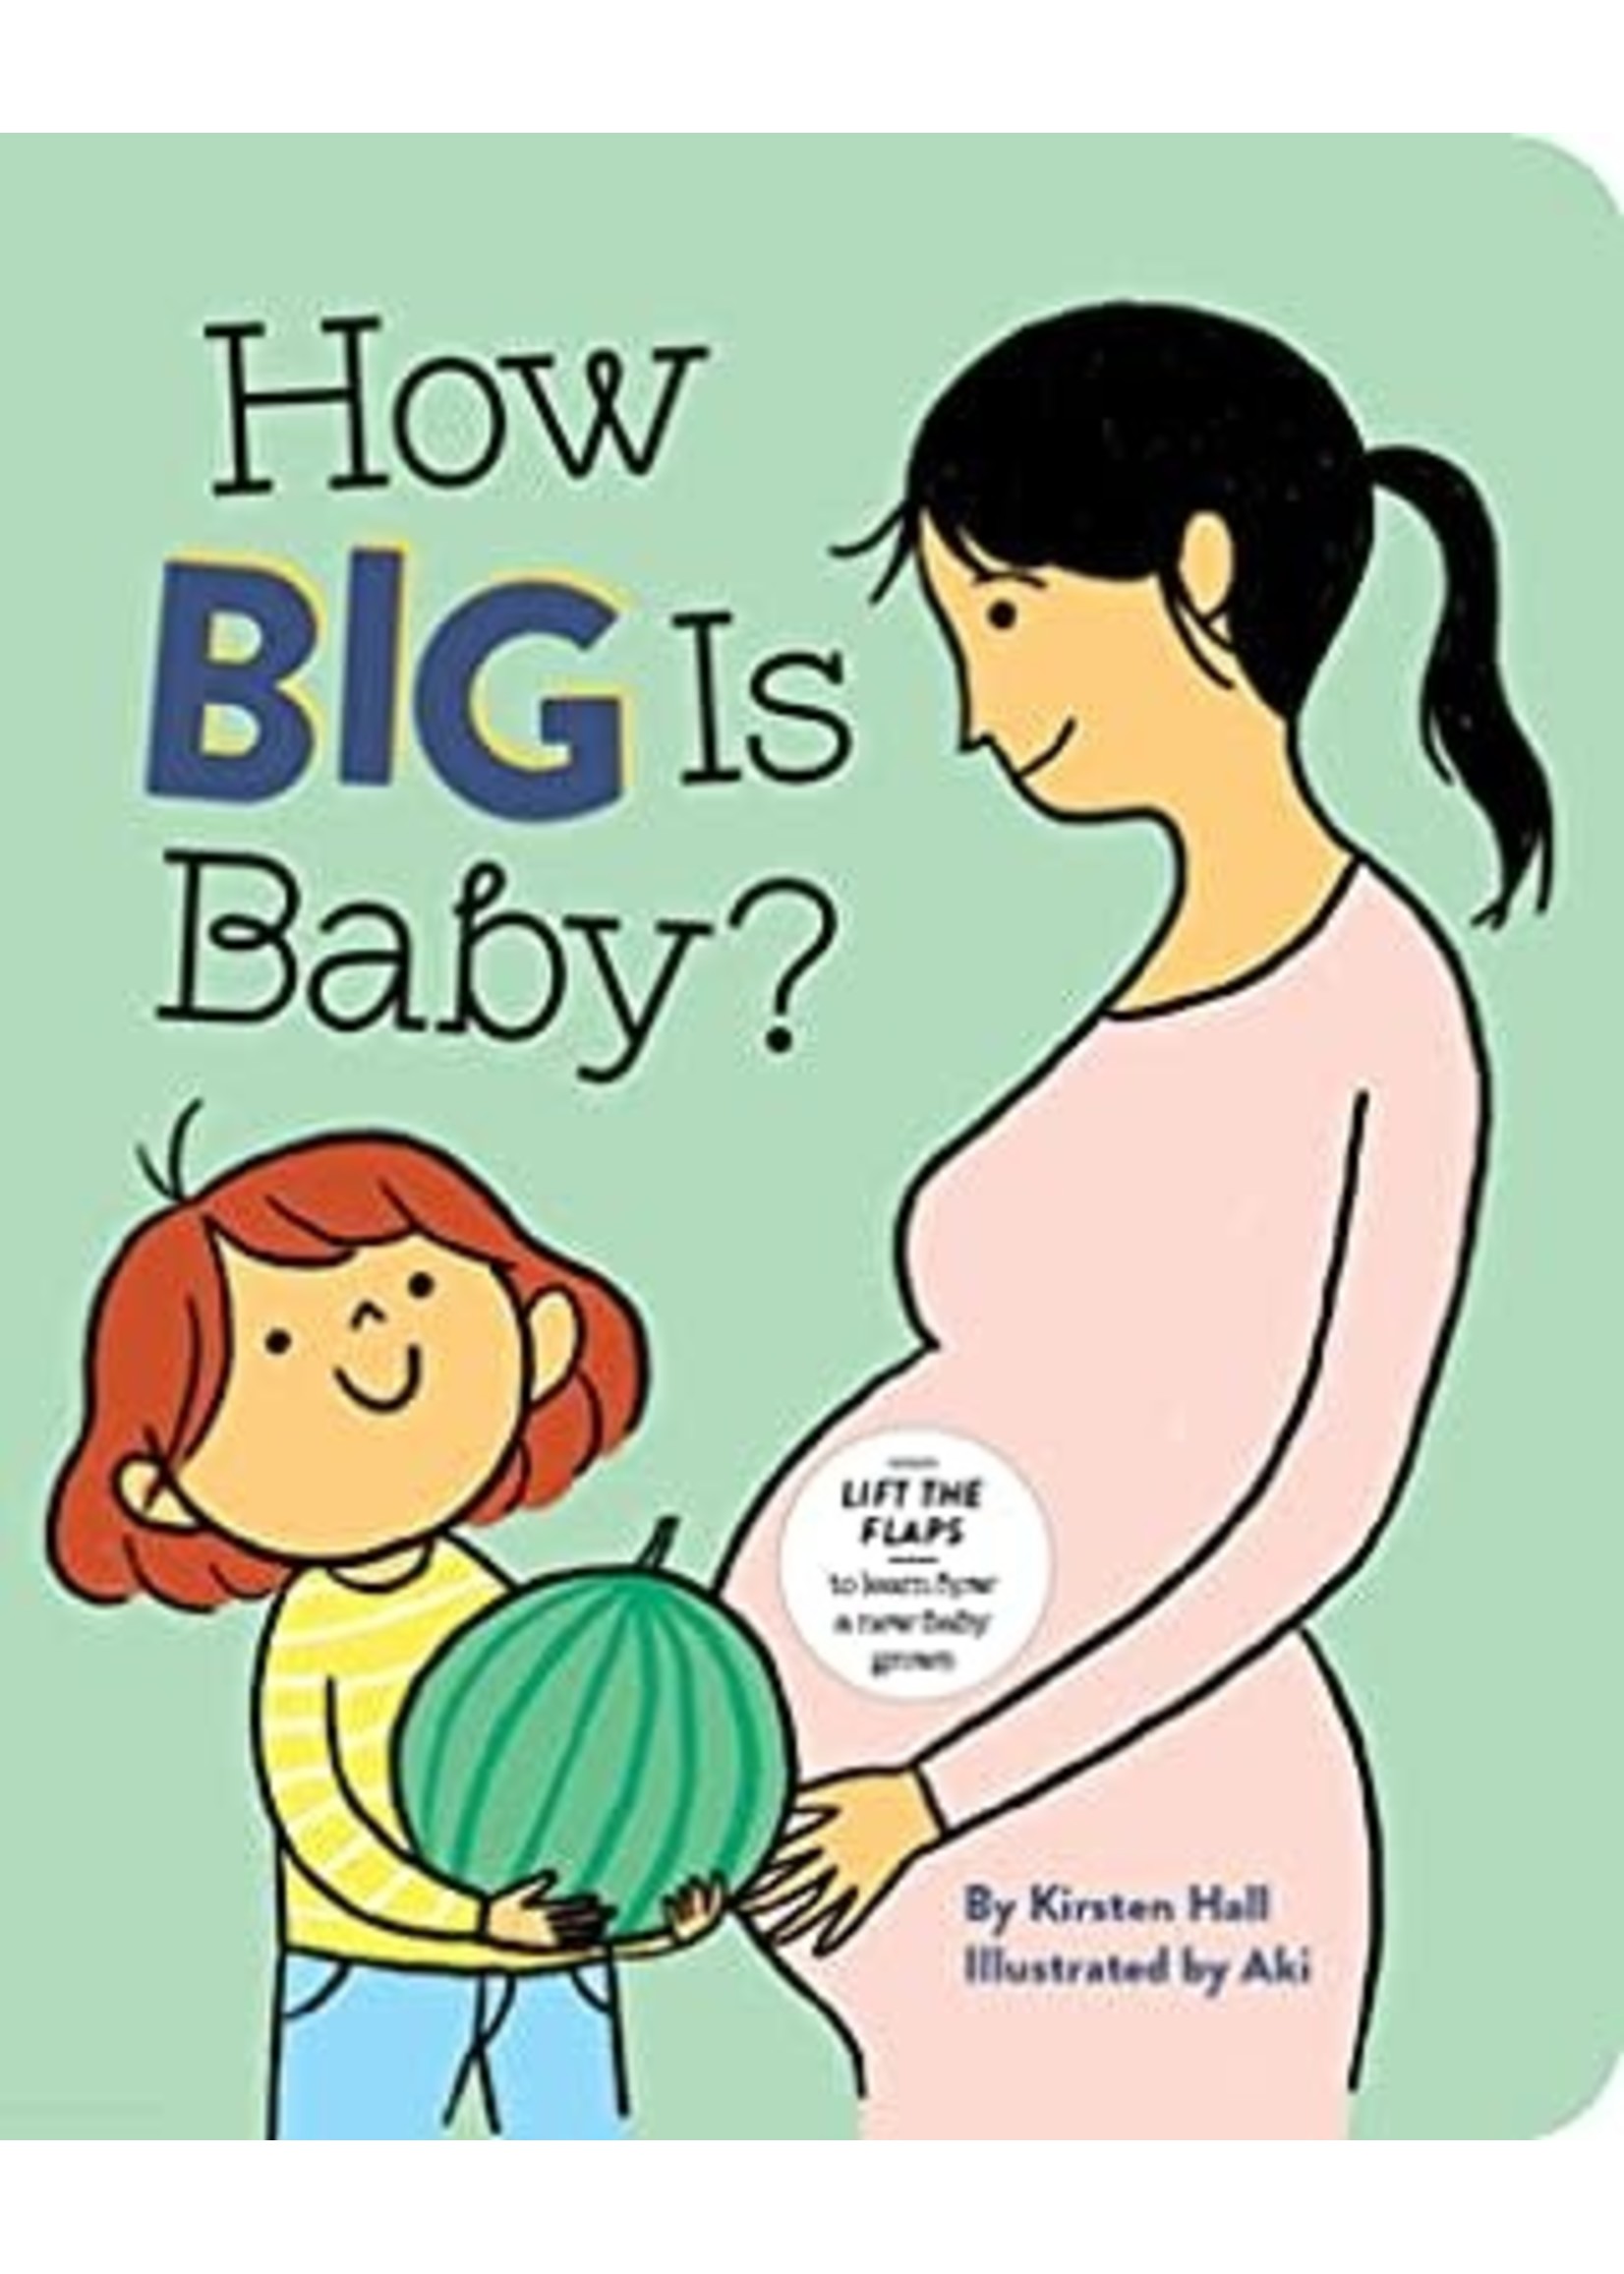 How Big Is Baby? by Kirsten Hall,  Aki